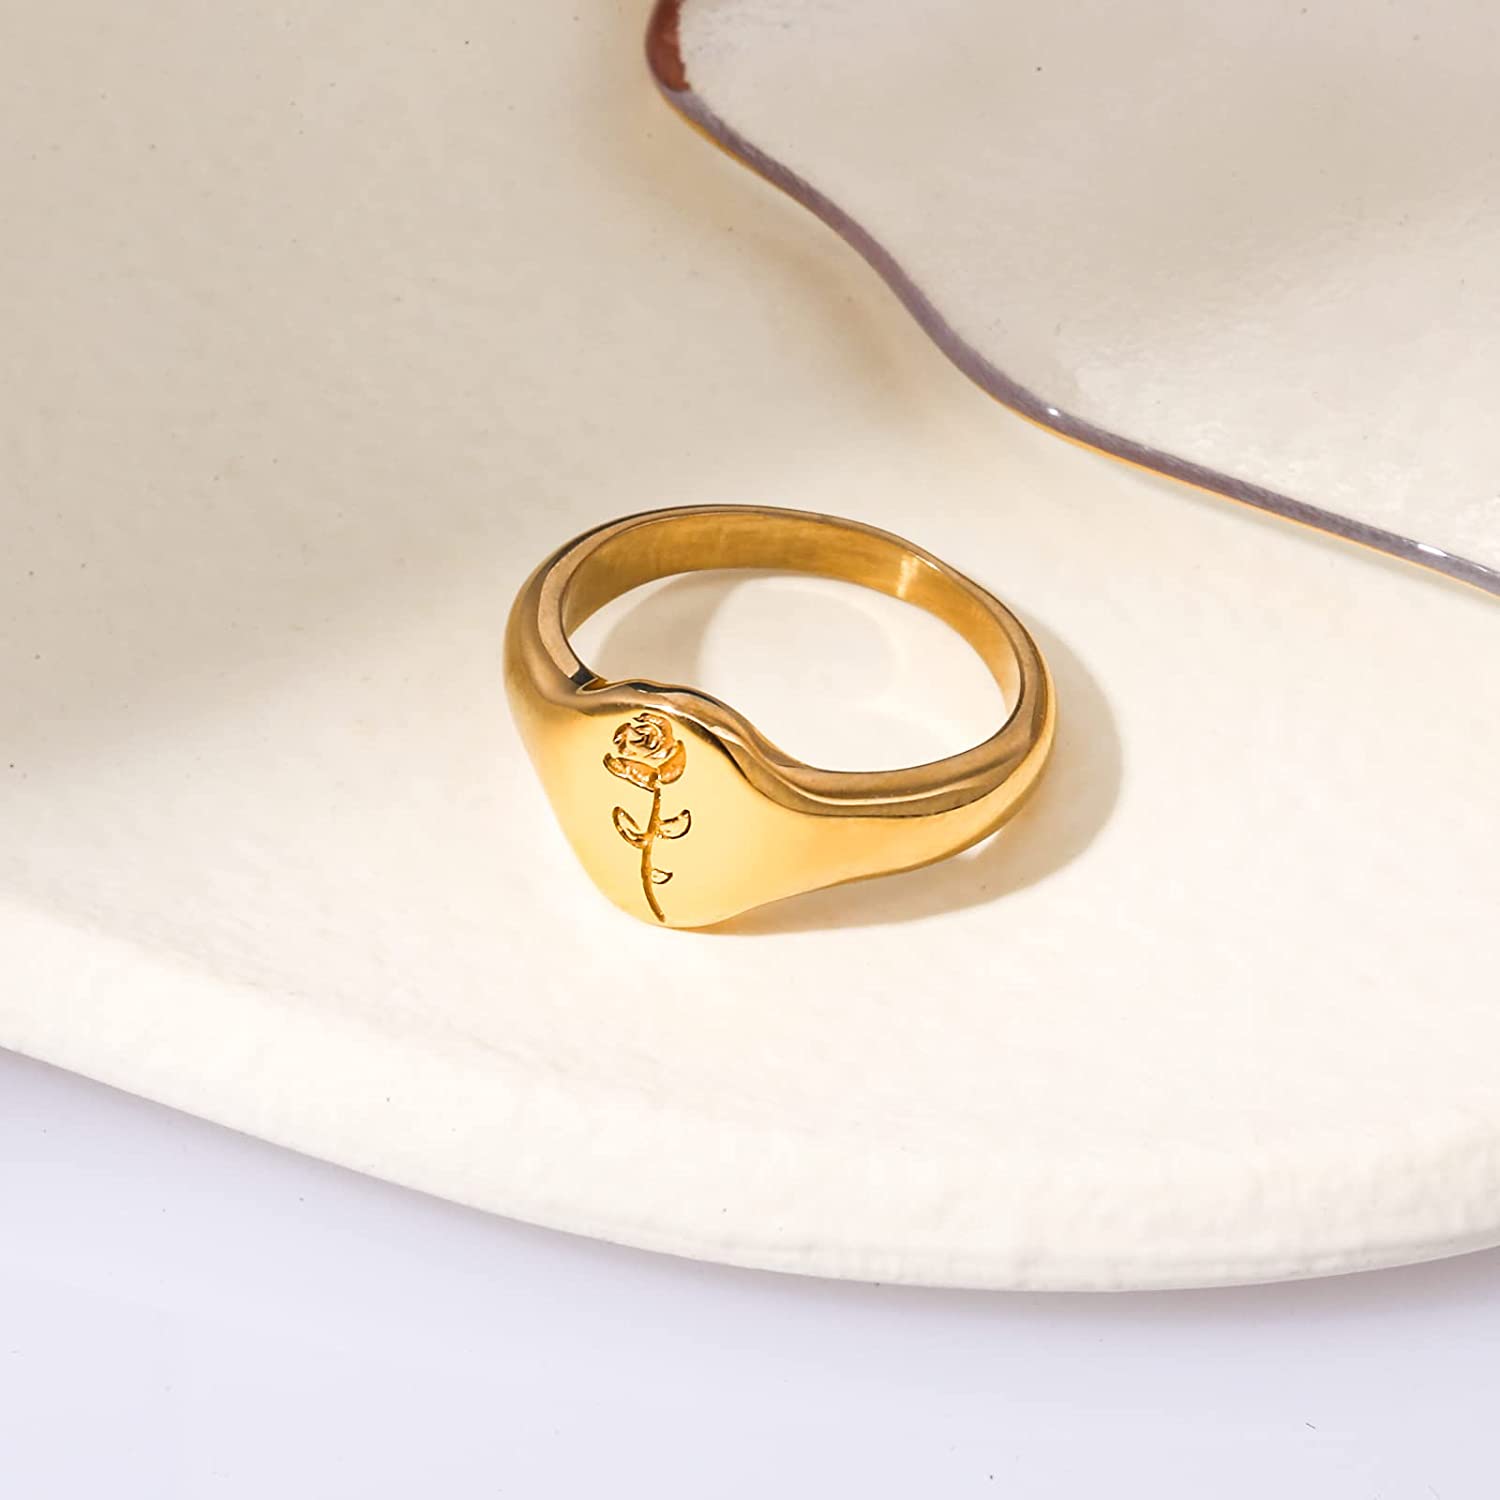 UNIKONCEPT Lifestyle Boutique and Lounge; Juliet Rose Signet 18 karat Gold Plated Ring pictured on a white background